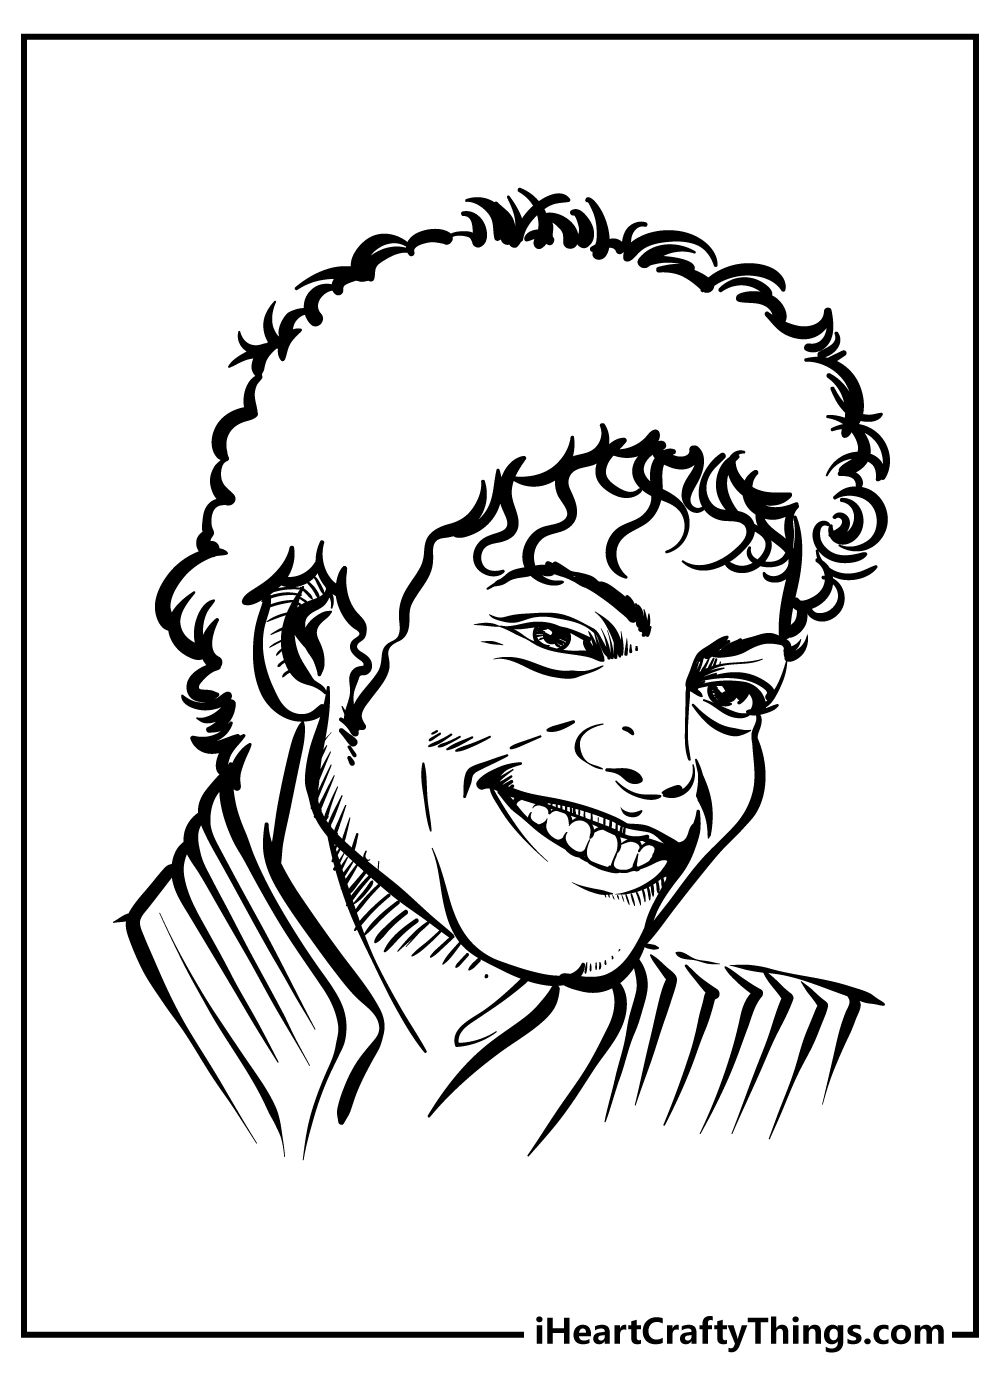 Michael Jackson Coloring Book for adults free download